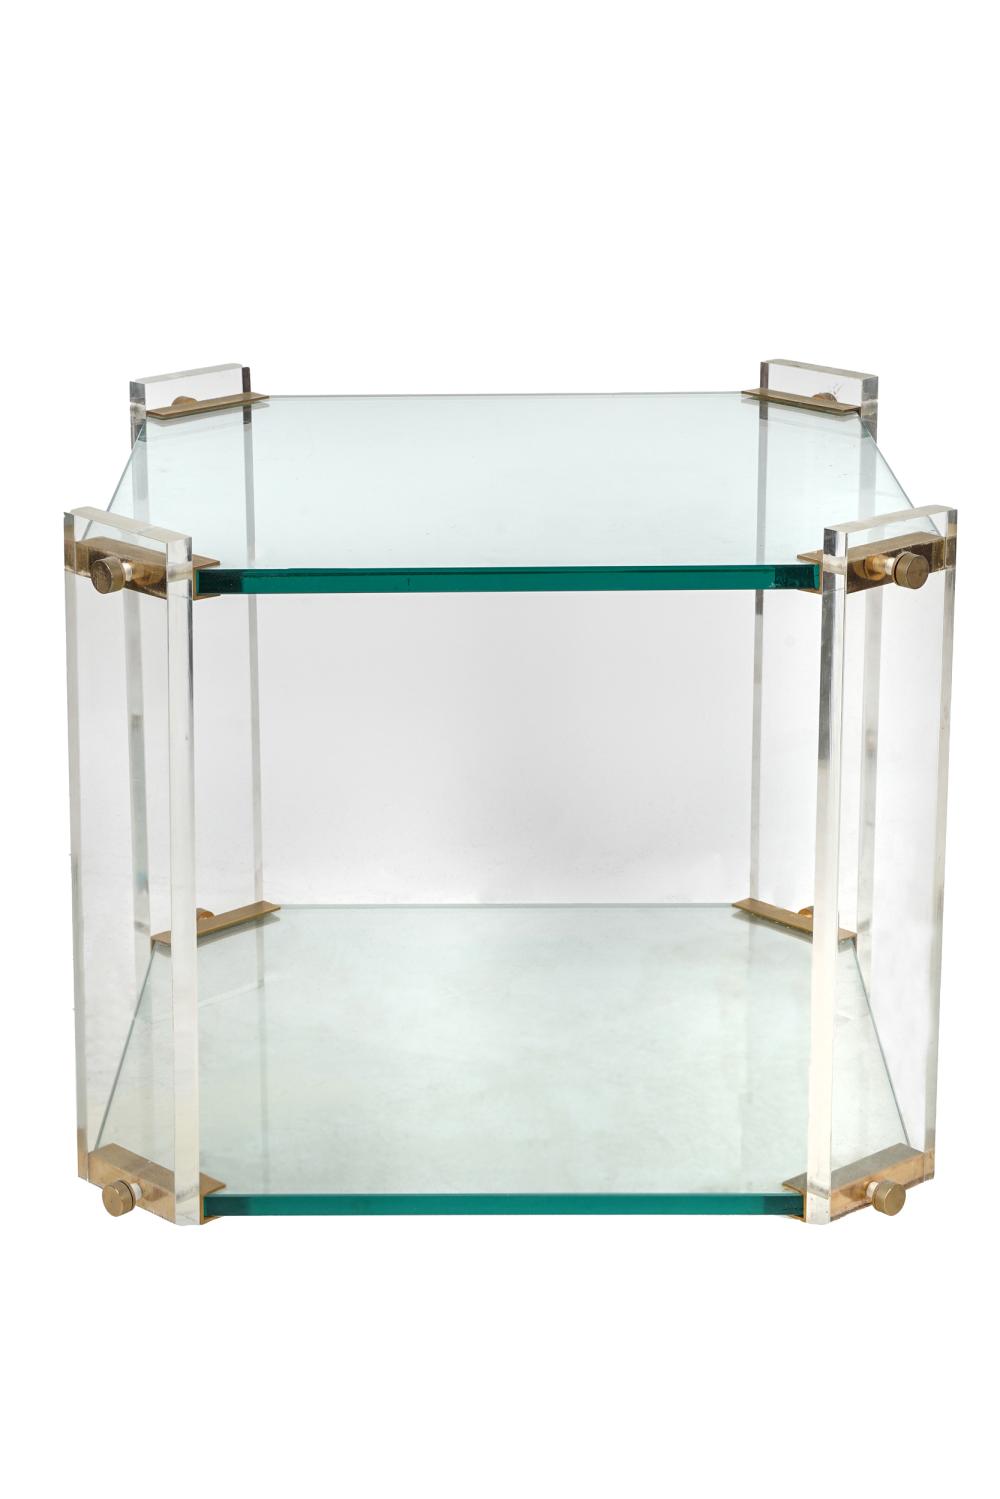 ACRYLIC SIDE TABLEwith two tiers 33312c